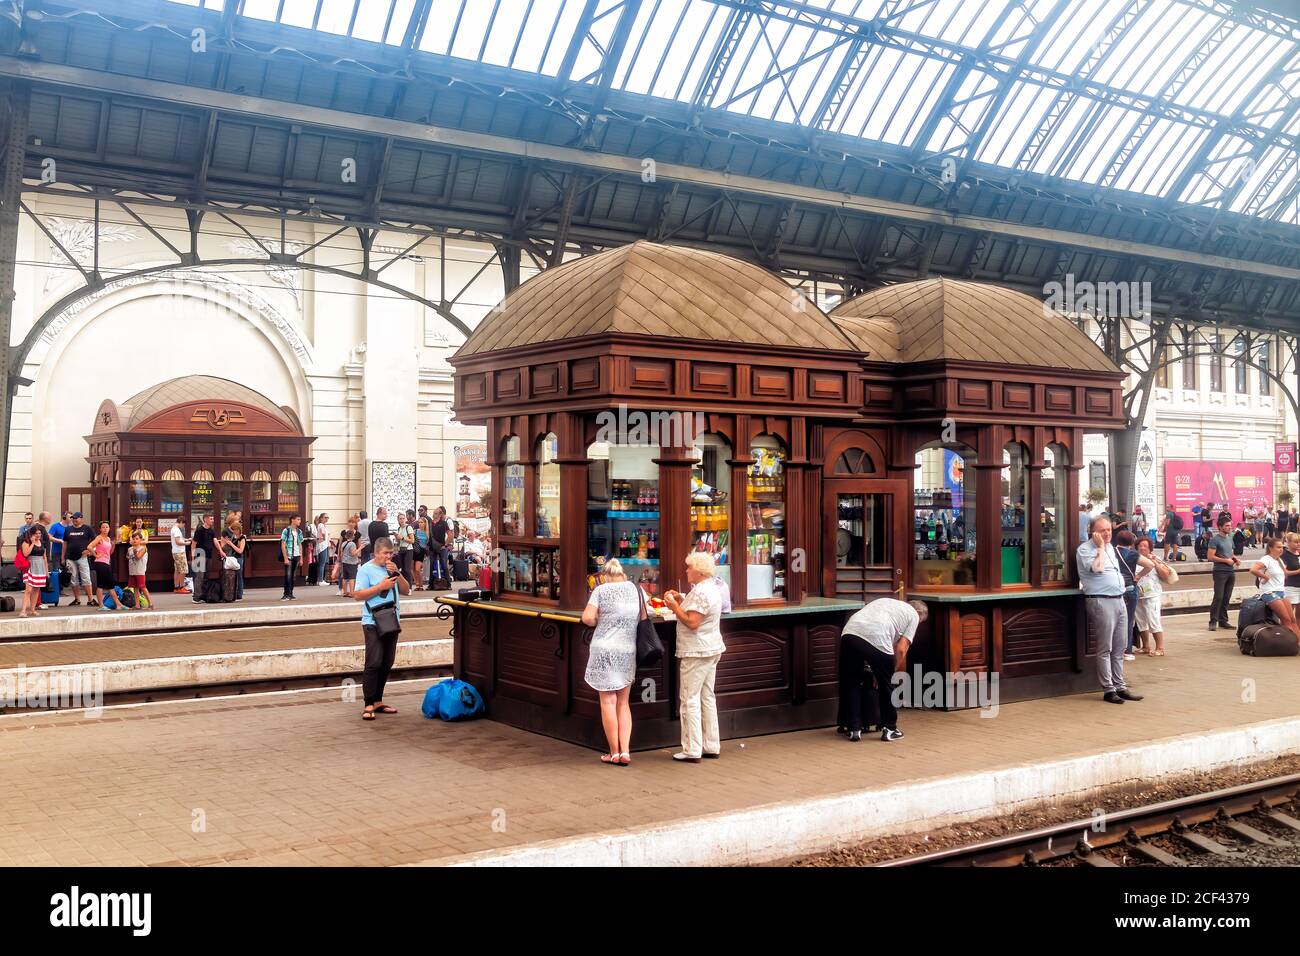 Lviv, Ukraine - July 30, 2018: Interior architecture of Lvov train station platform with kiosk store and people waiting with luggage in historic Ukrai Stock Photo